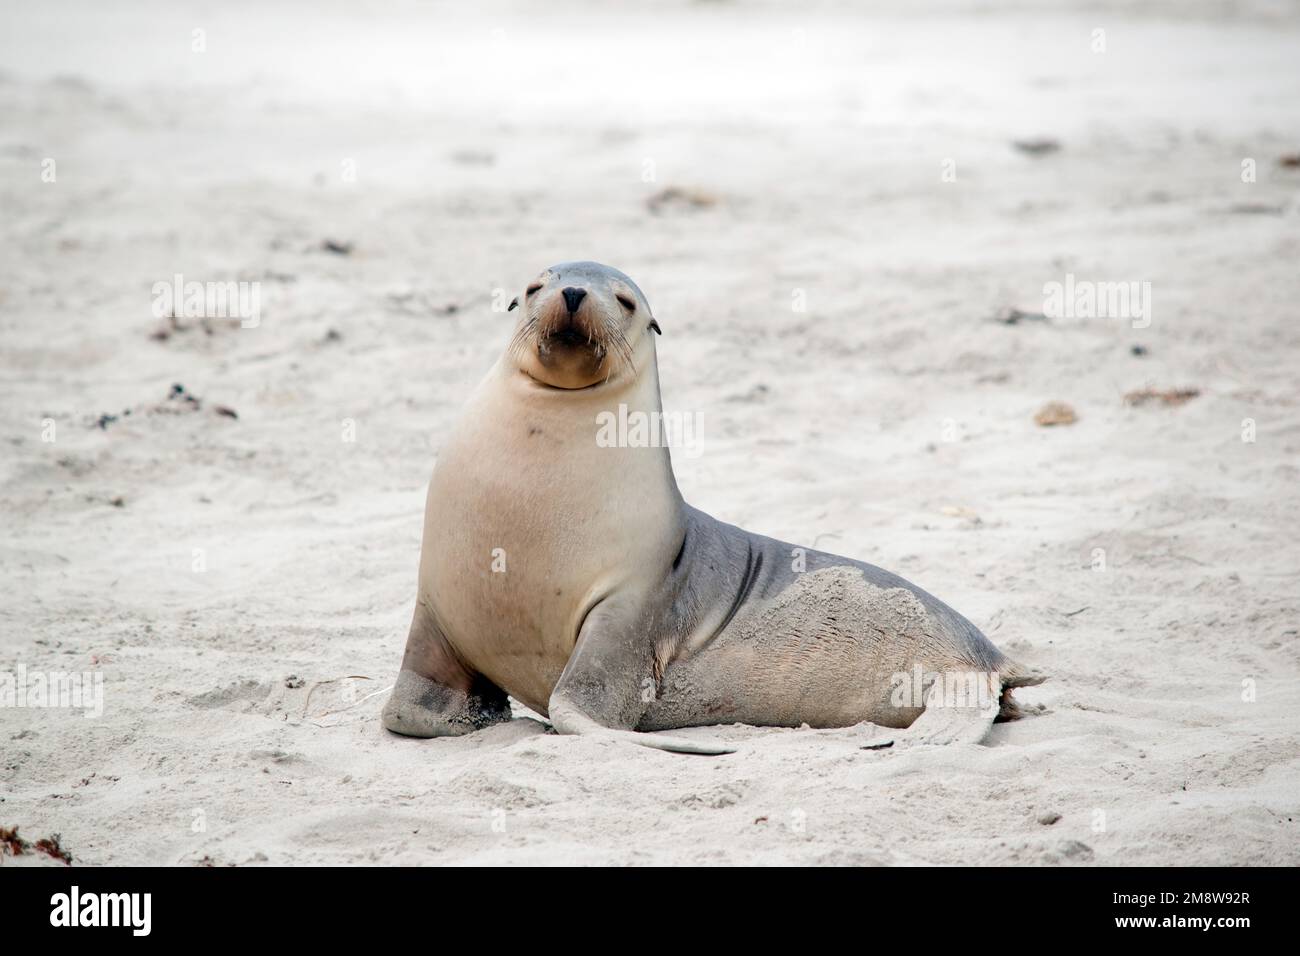 the sea lion pup is white on the bottom and grey on top Stock Photo